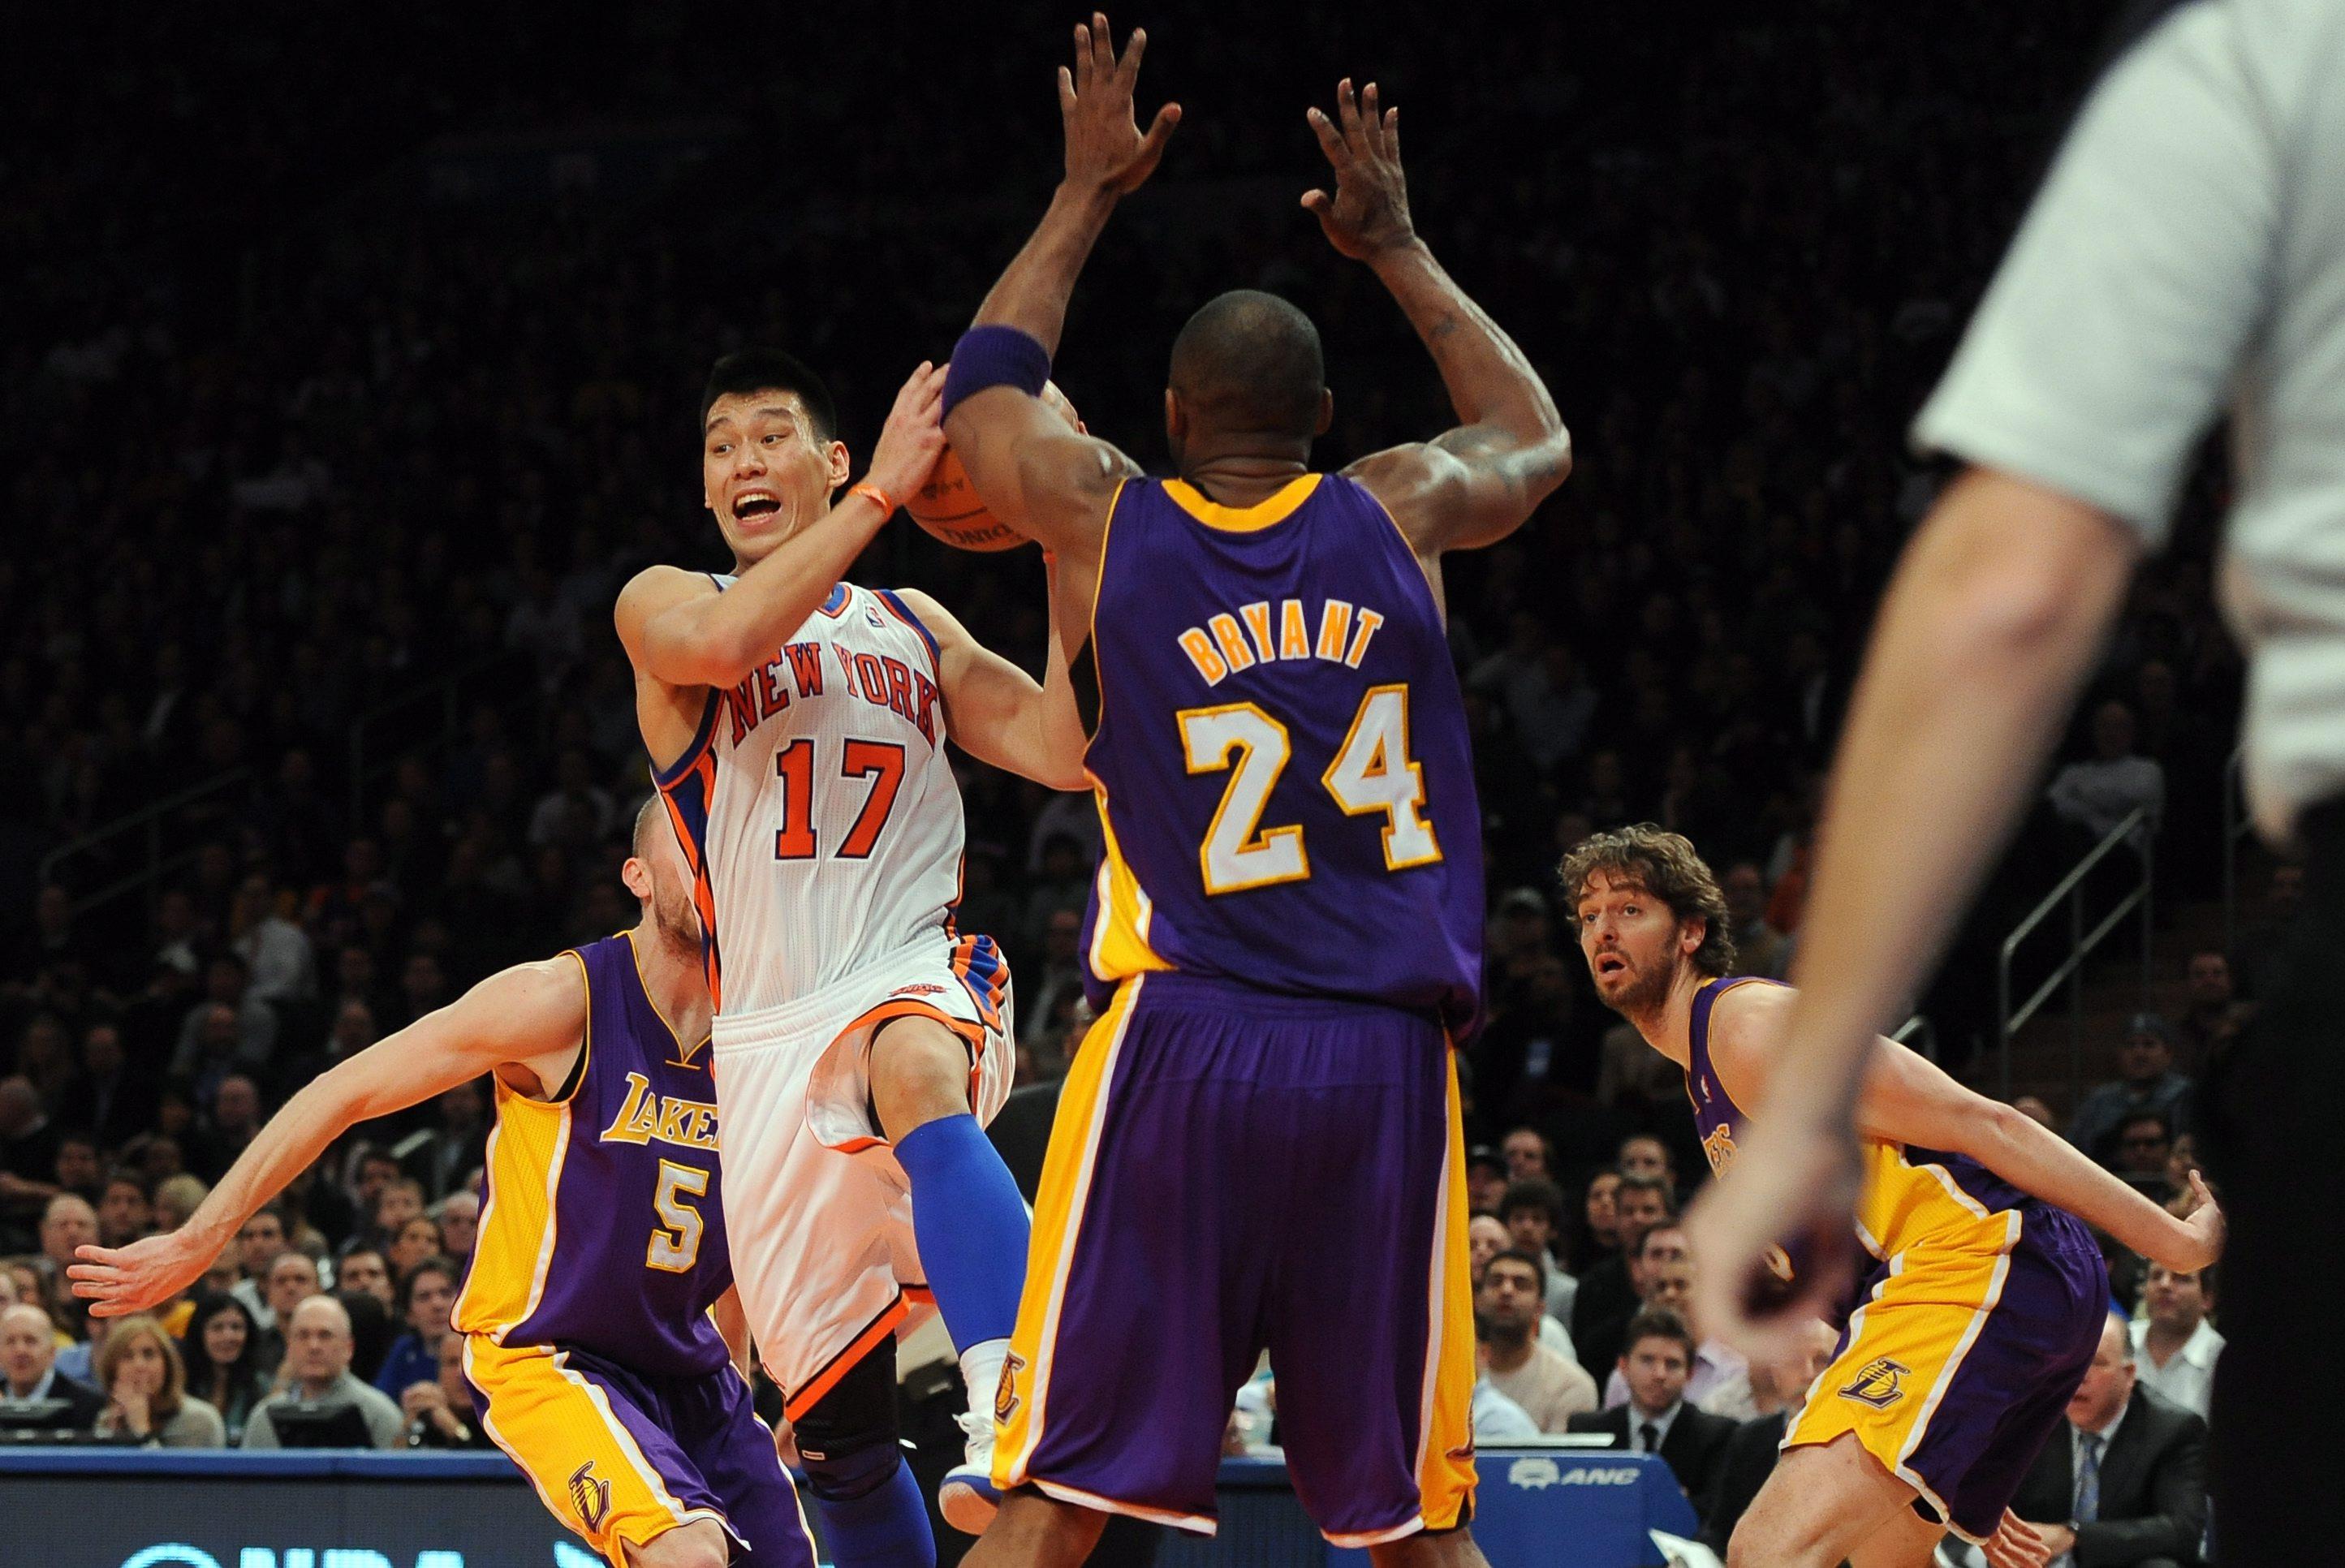 Former New York Knicks point guard Jeremy Lin  drives to the basket as Los Angeles Lakers shooting guard Kobe Bryant defends at Madison Square Garden on February 10, 2012.  Photo: EPA